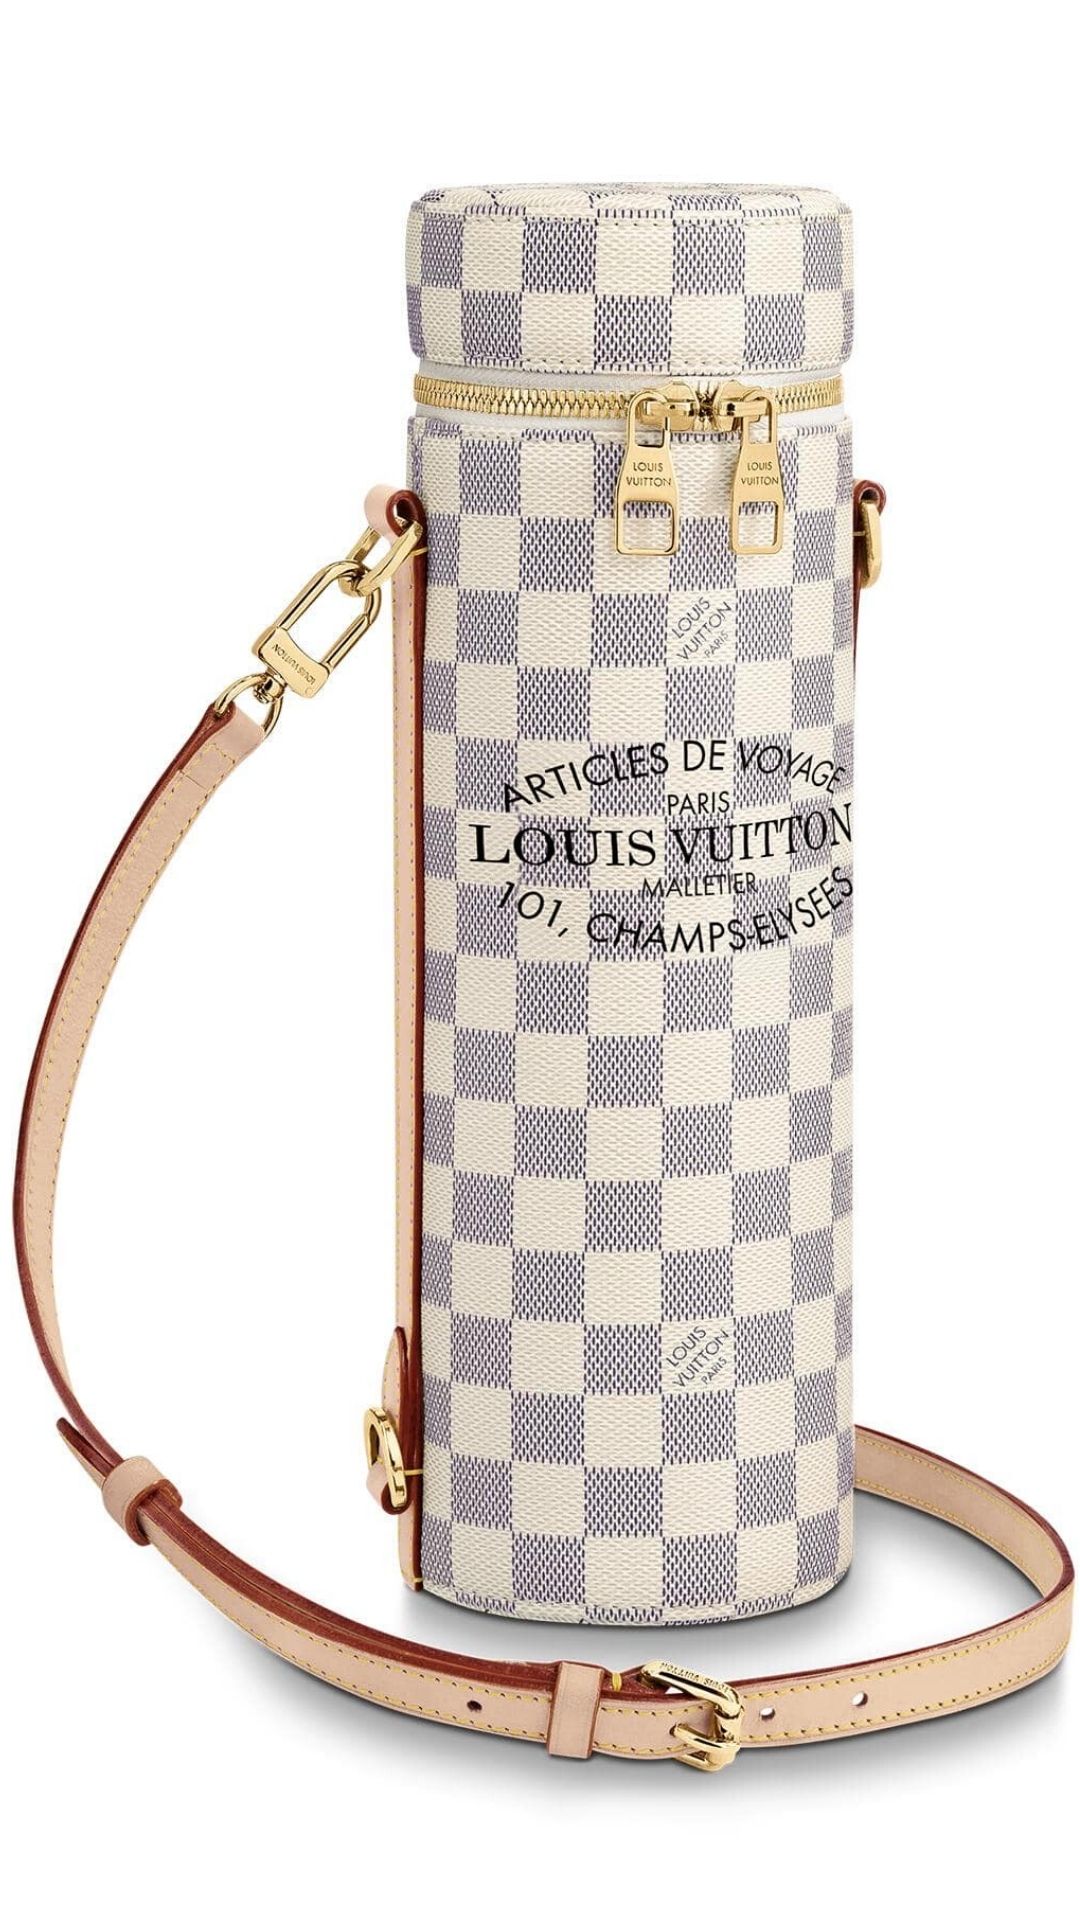 Chanel and Louis Vuitton water bottles 😍 , These can